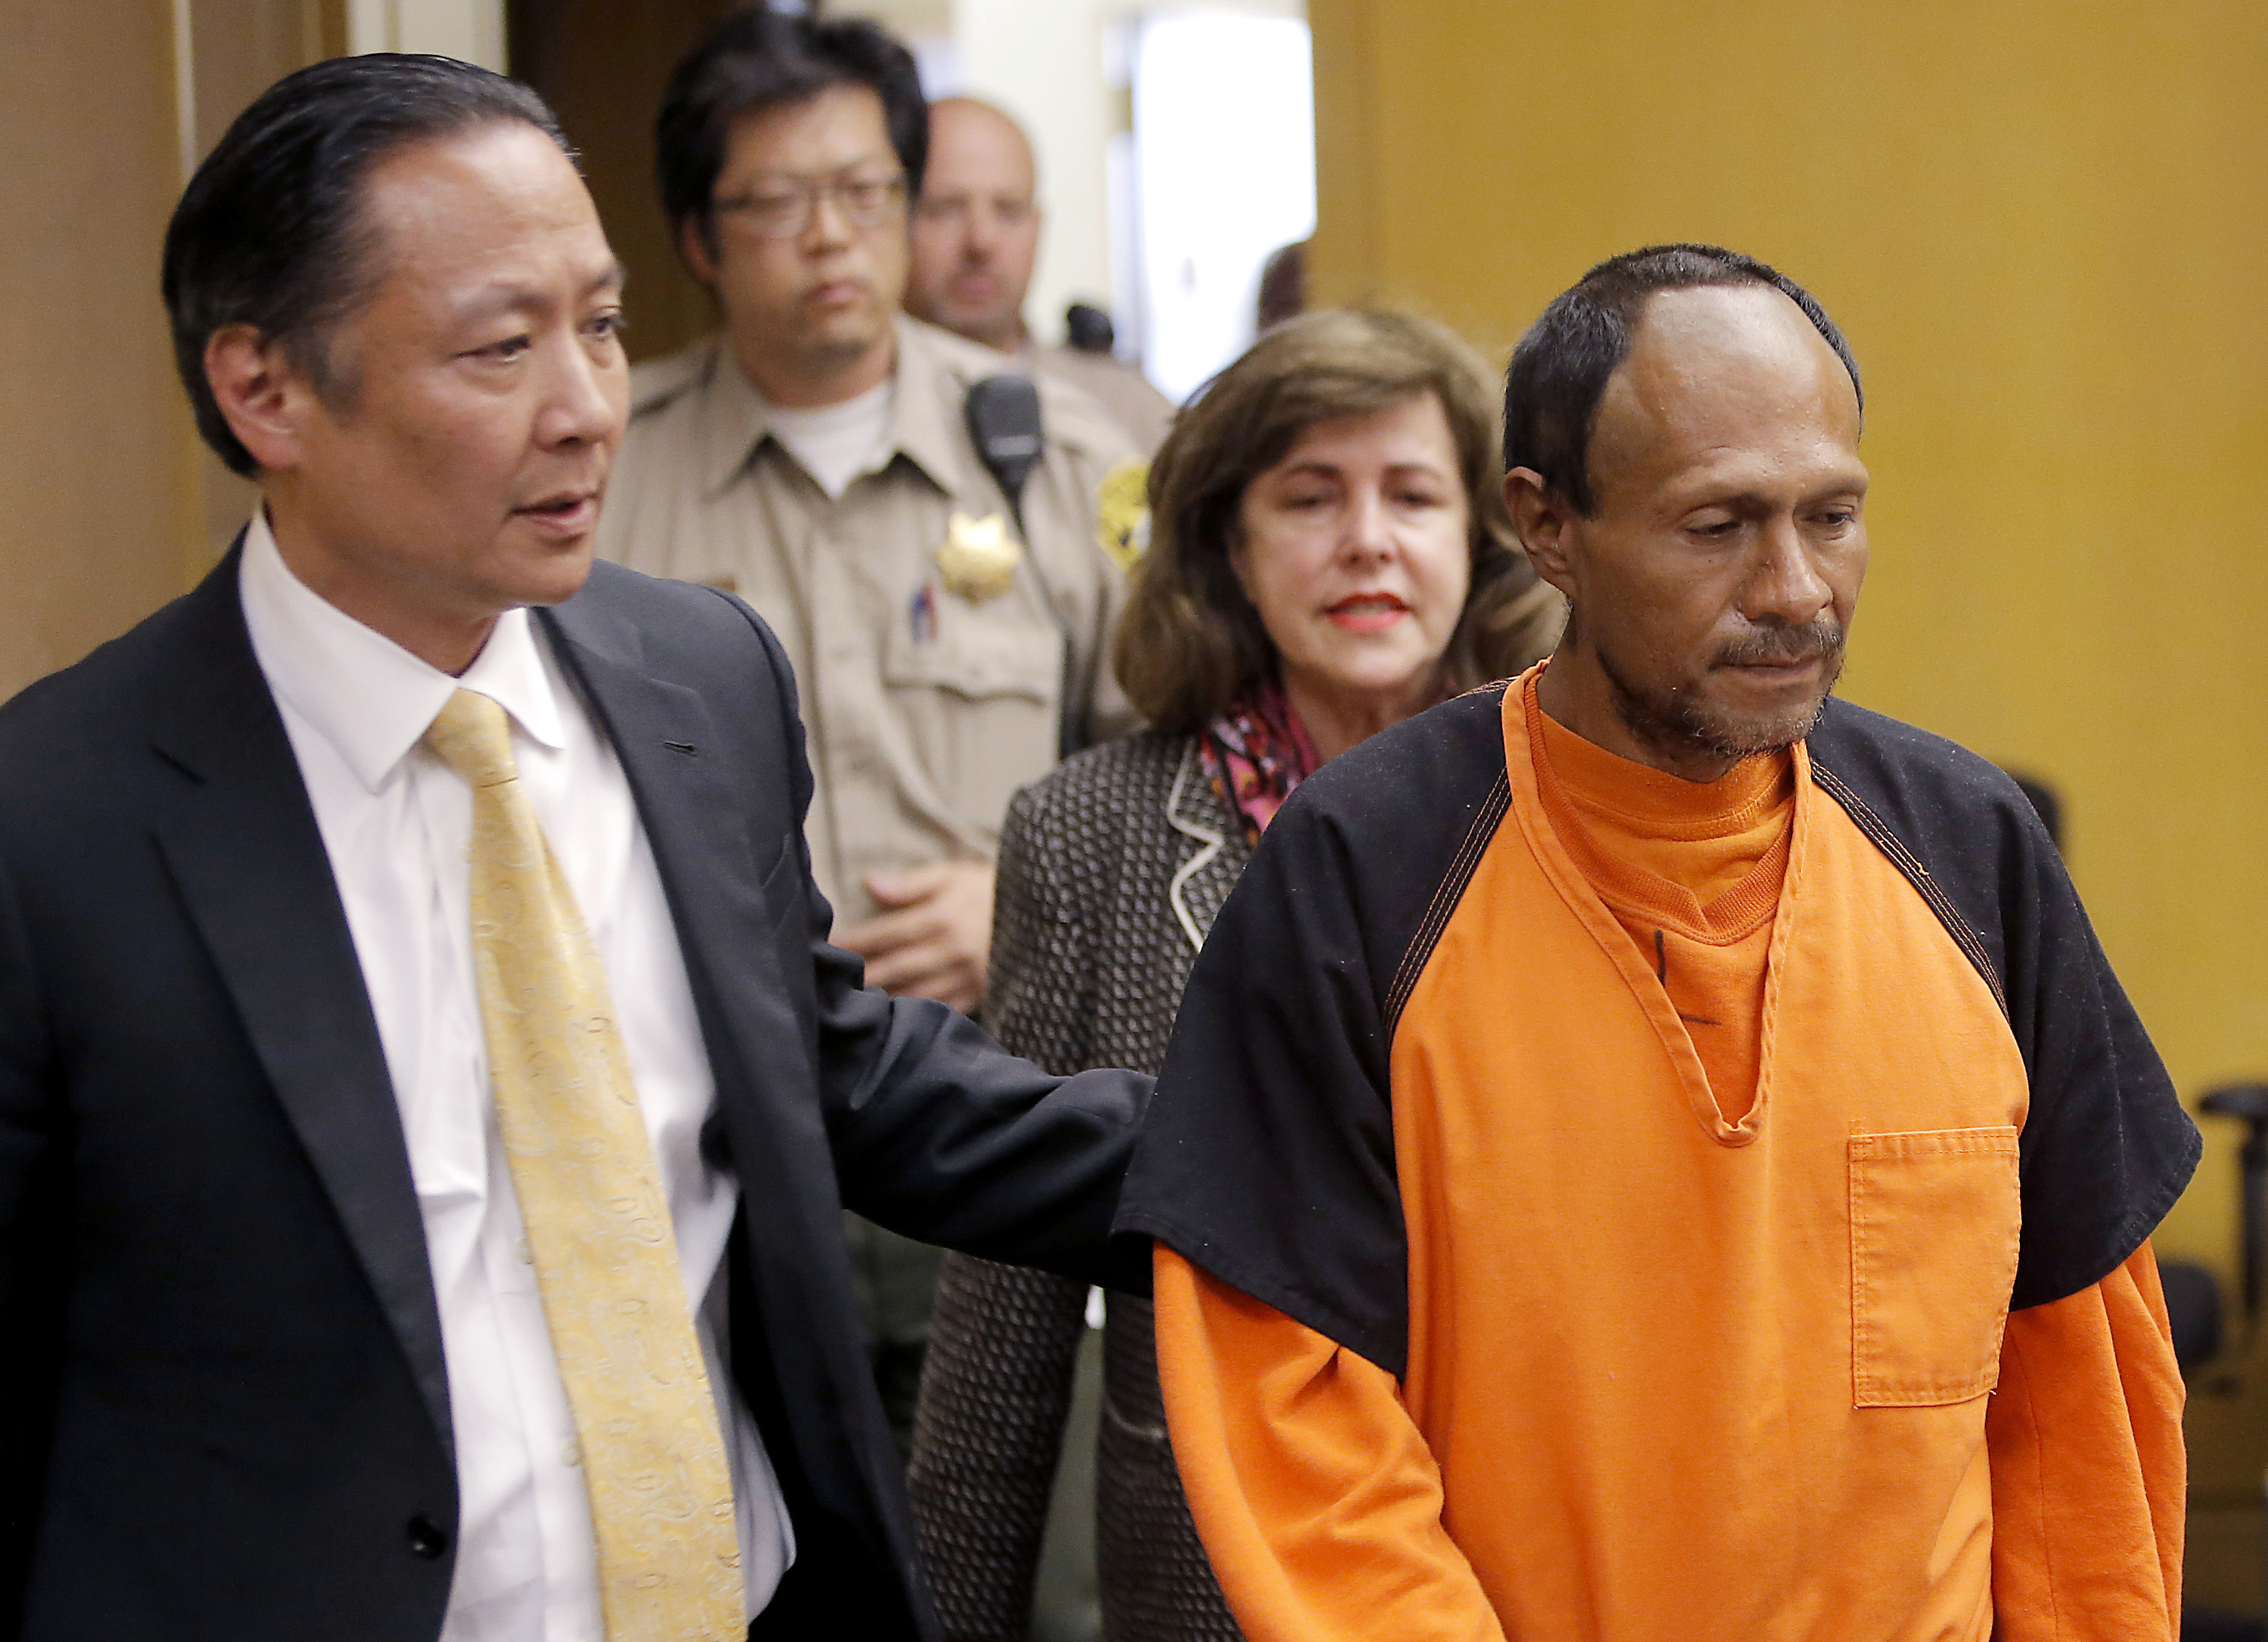 Juan Francisco Lopez-Sanchez (R) is lead into the courtroom by San Francisco Public Defender Jeff Adachi (L) and Assistant District Attorney Diana Garciaor (C), for his arraignment at the Hall of Justice in San Francisco. Juan, an illegal immigrant with seven felony convictions in the U.S. and previously deported to Mexico five times, fatally shot 32-year-old Kate Steinle on July 1. (Michael Macor/San Francisco Chronicle via AP)